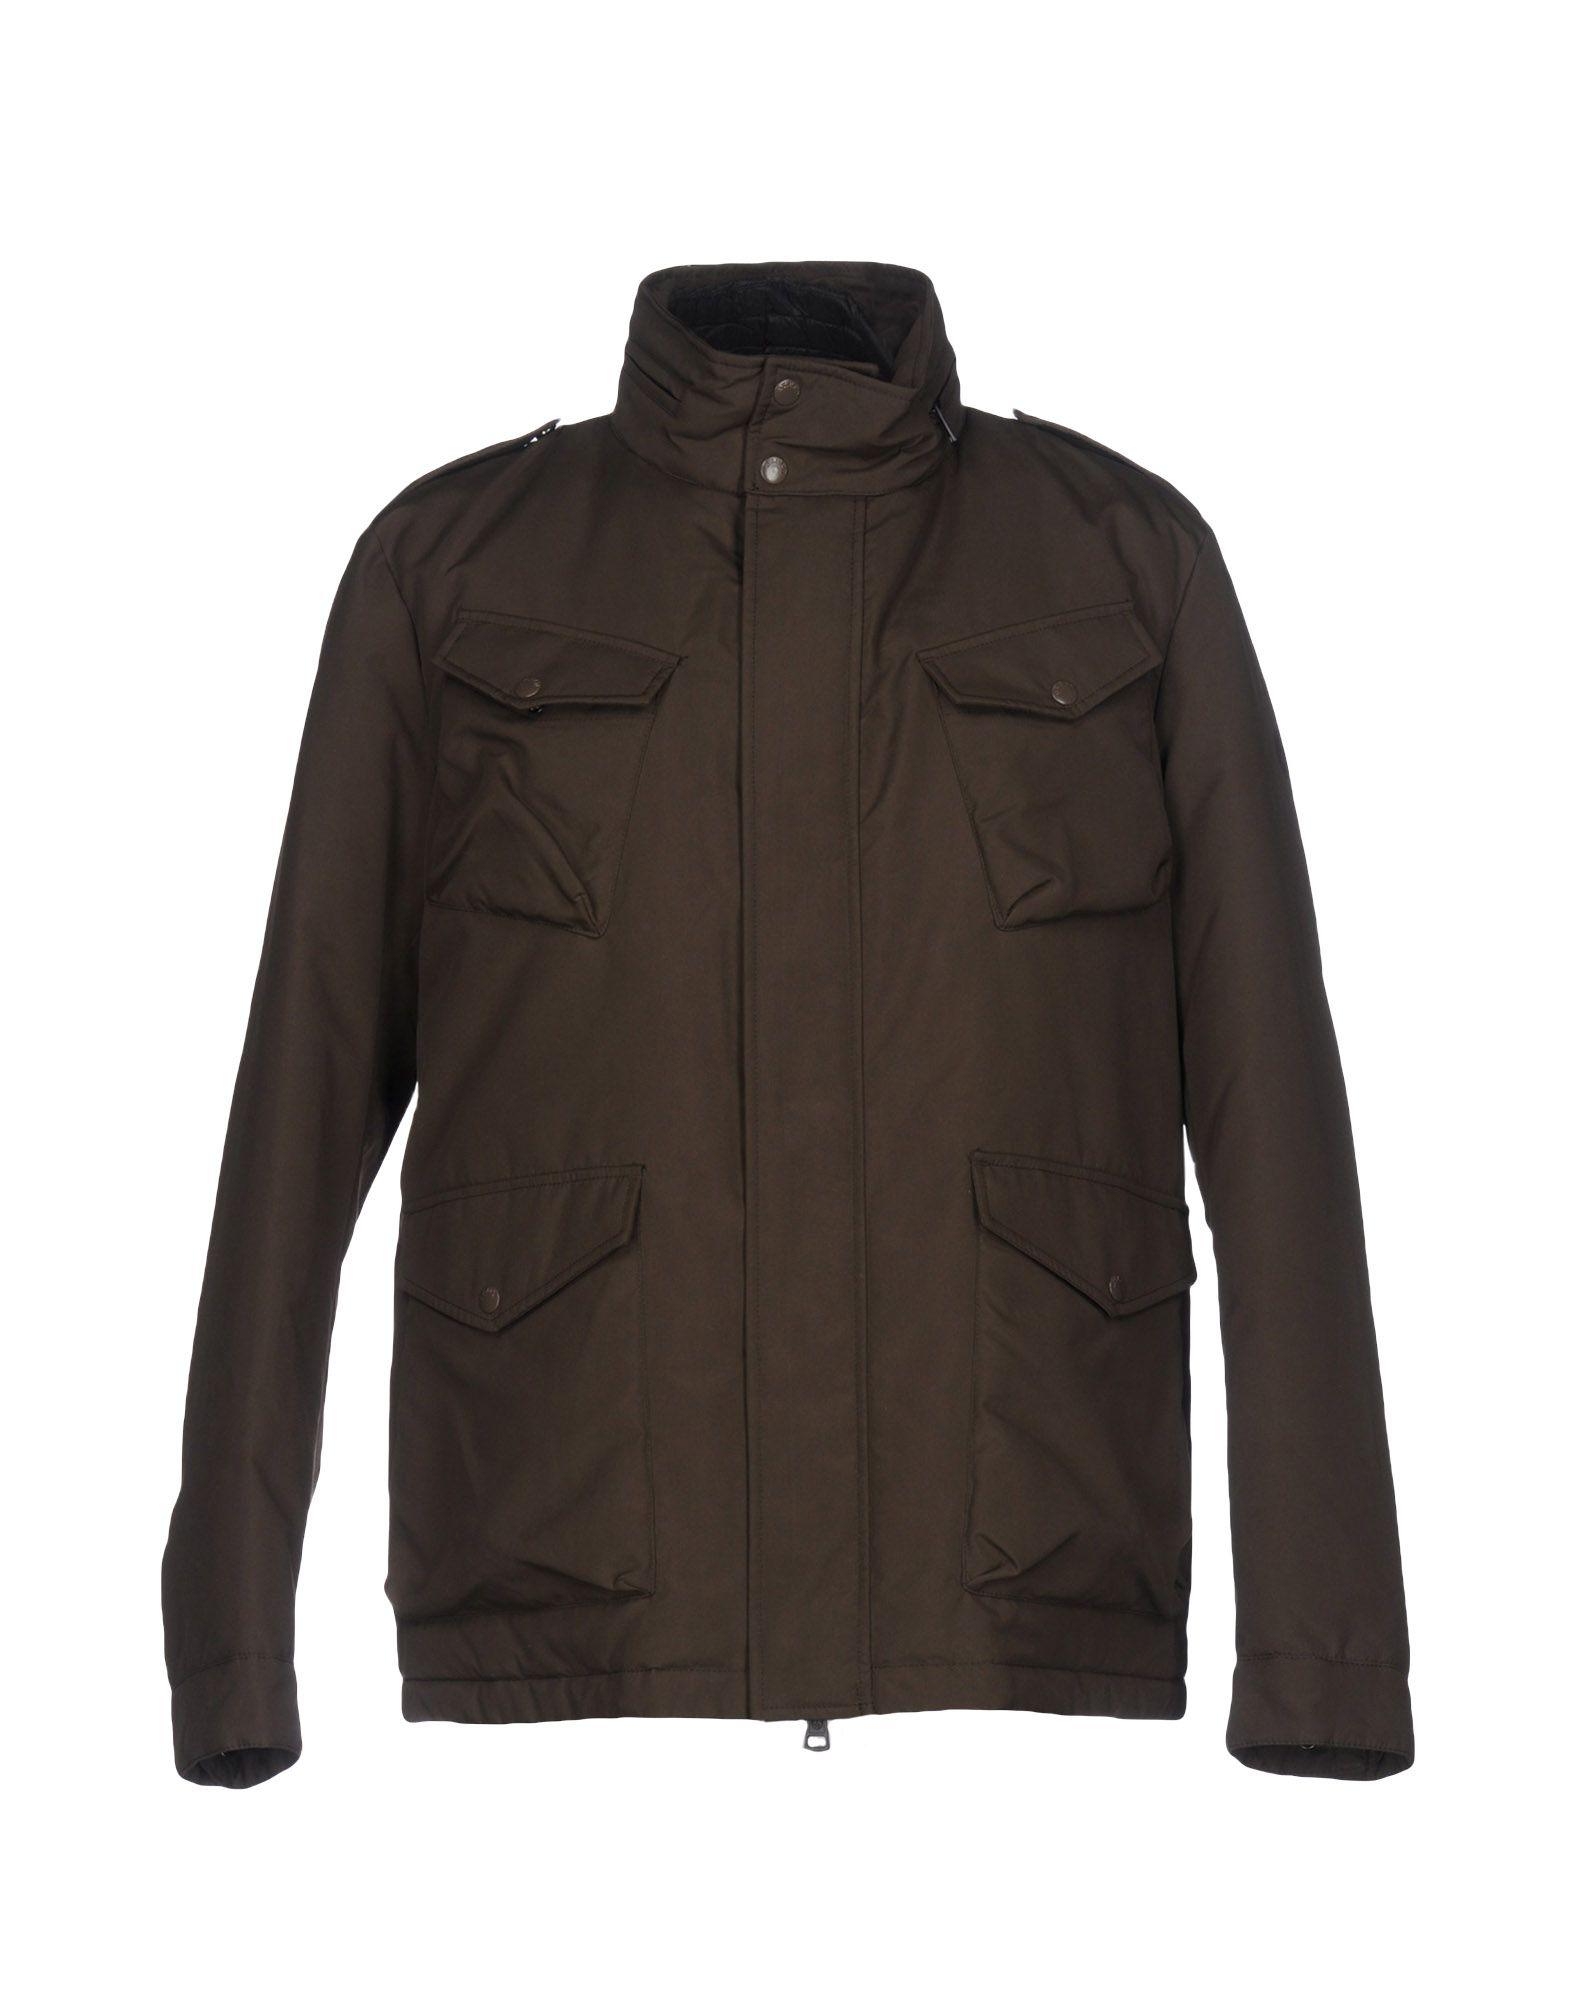 AT.P.CO Synthetic Jacket in Military Green (Green) for Men - Lyst